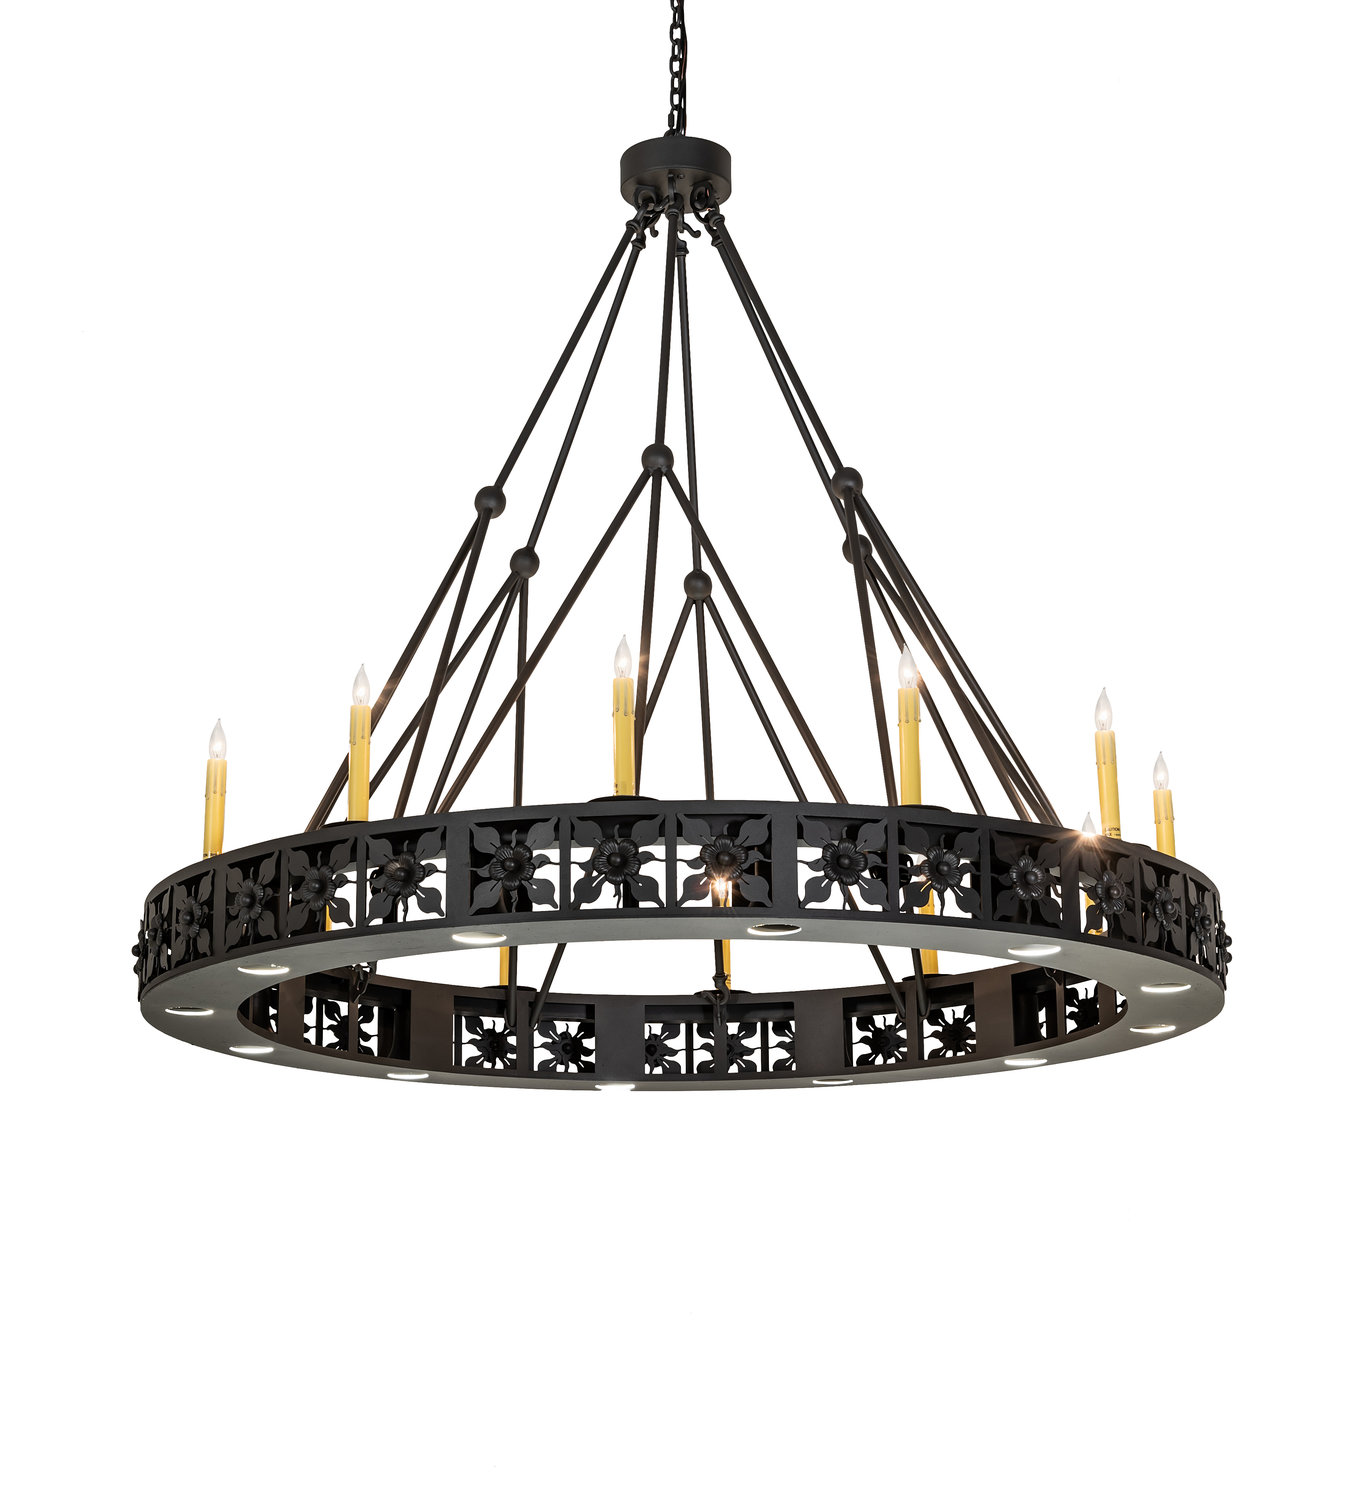 The Belmont Chapel Chandelier, a new product of Meyda Lighting, 55 Oriskany Blvd. in Yorkville, features delicate floral and leaf designs.